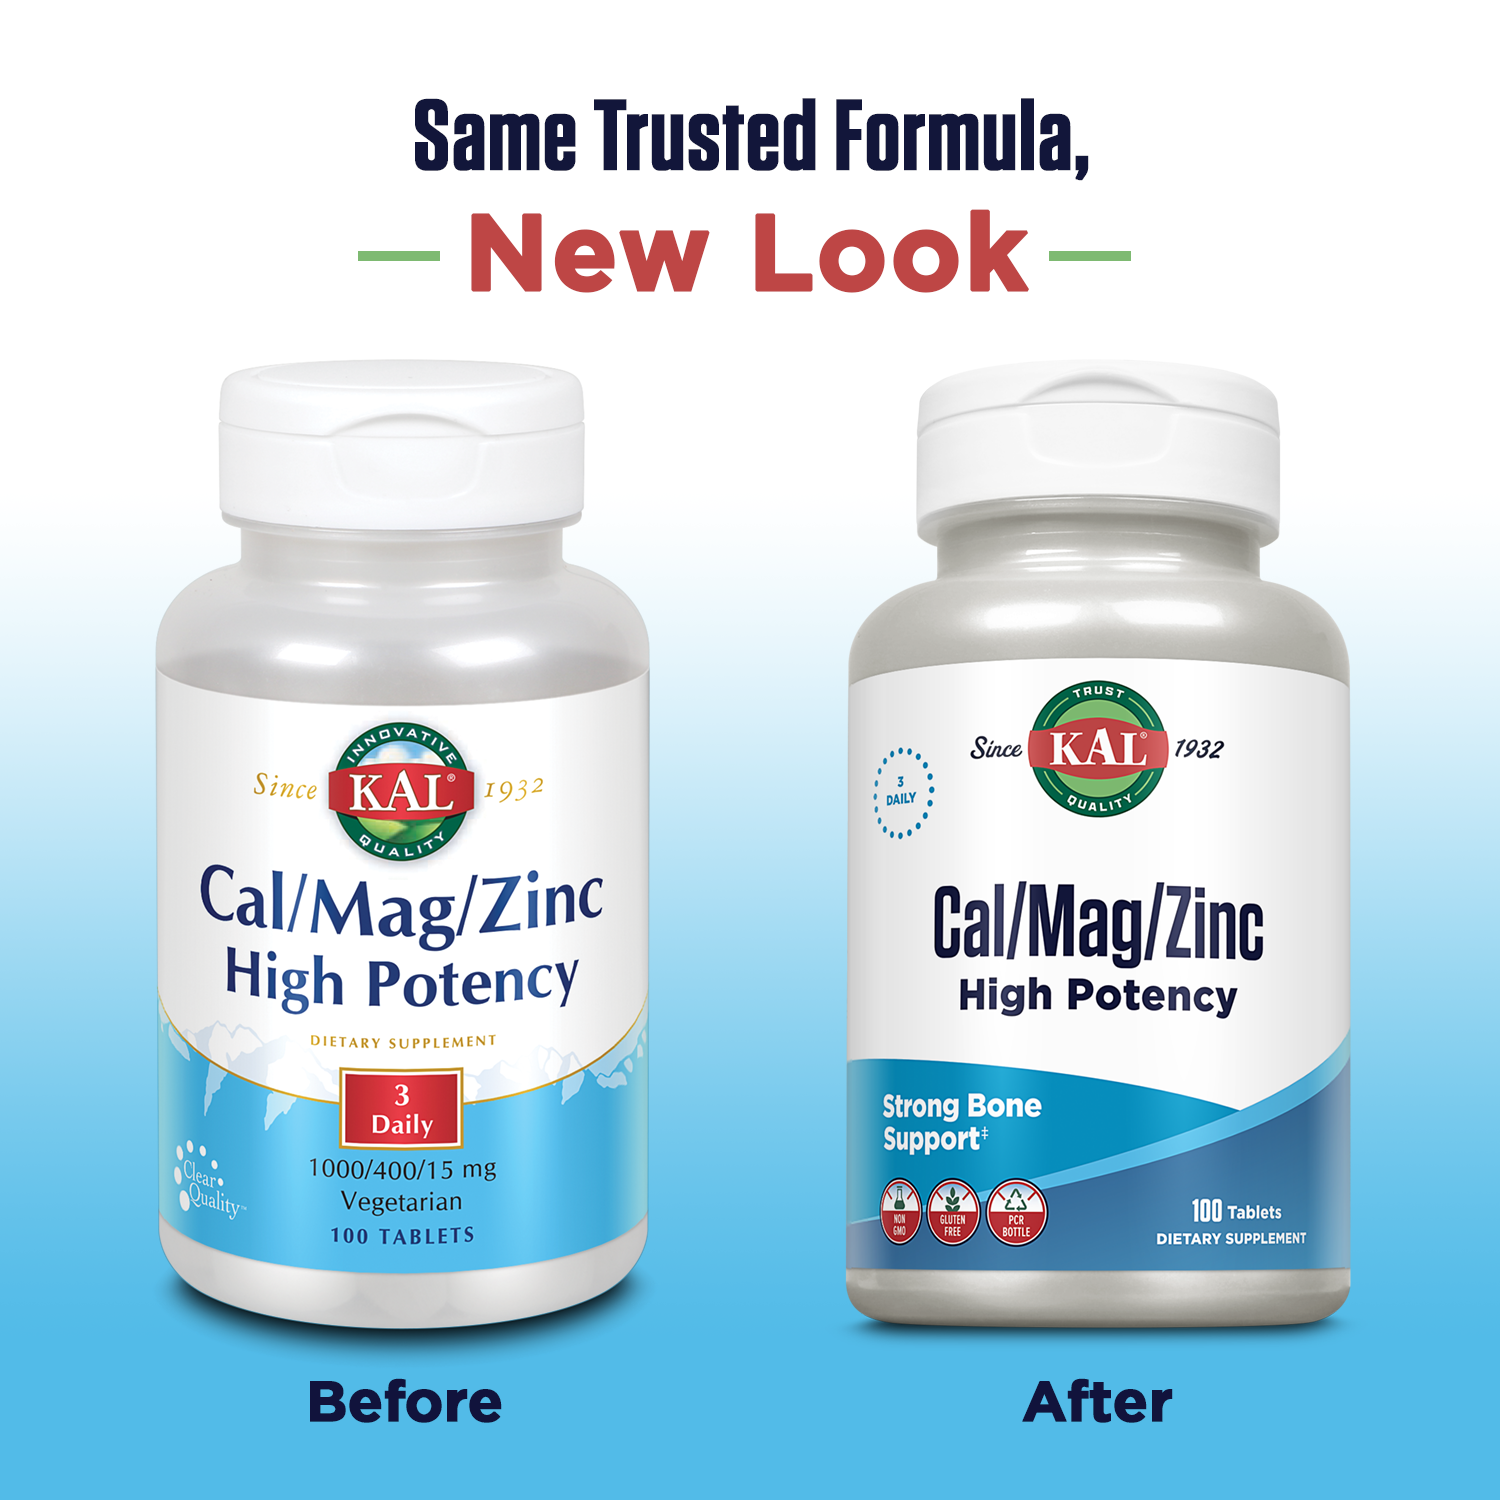 KAL Cal/Mag/Zinc | 1000 mg of Calcium, 400 mg of Magnesium & 15 mg of Zinc | Healthy Bones, Muscle, Heart & Immune Function Support | 100 Tablets - image 2 of 5